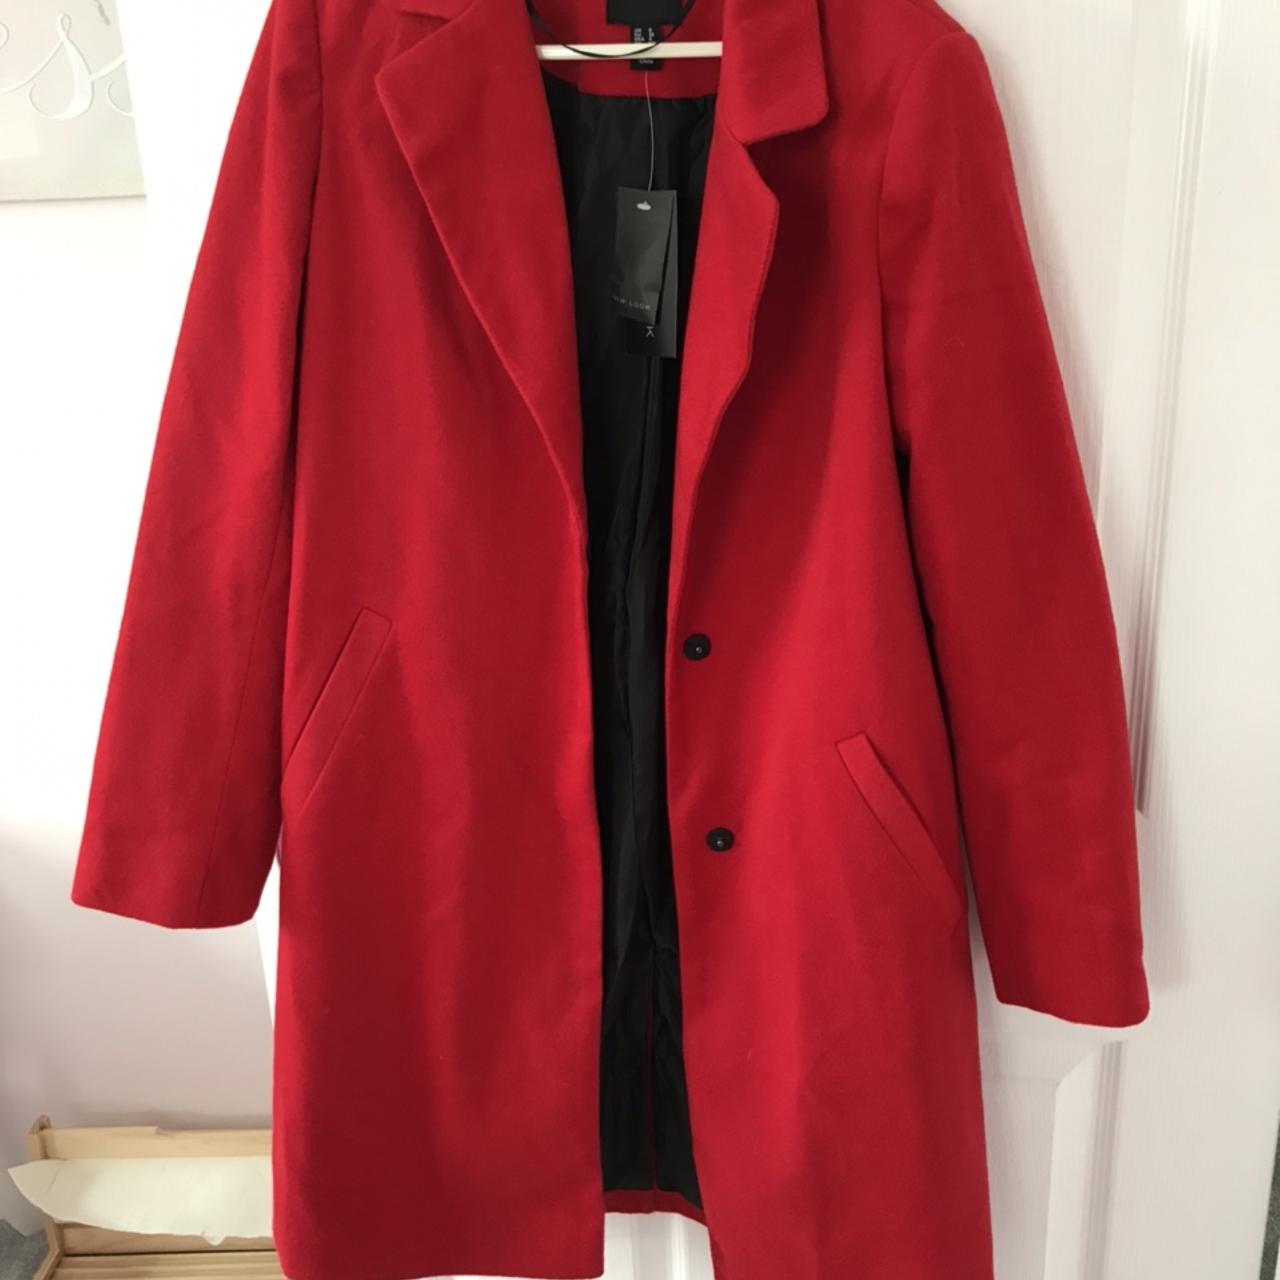 New look red coat size 7. New with tags. - Depop